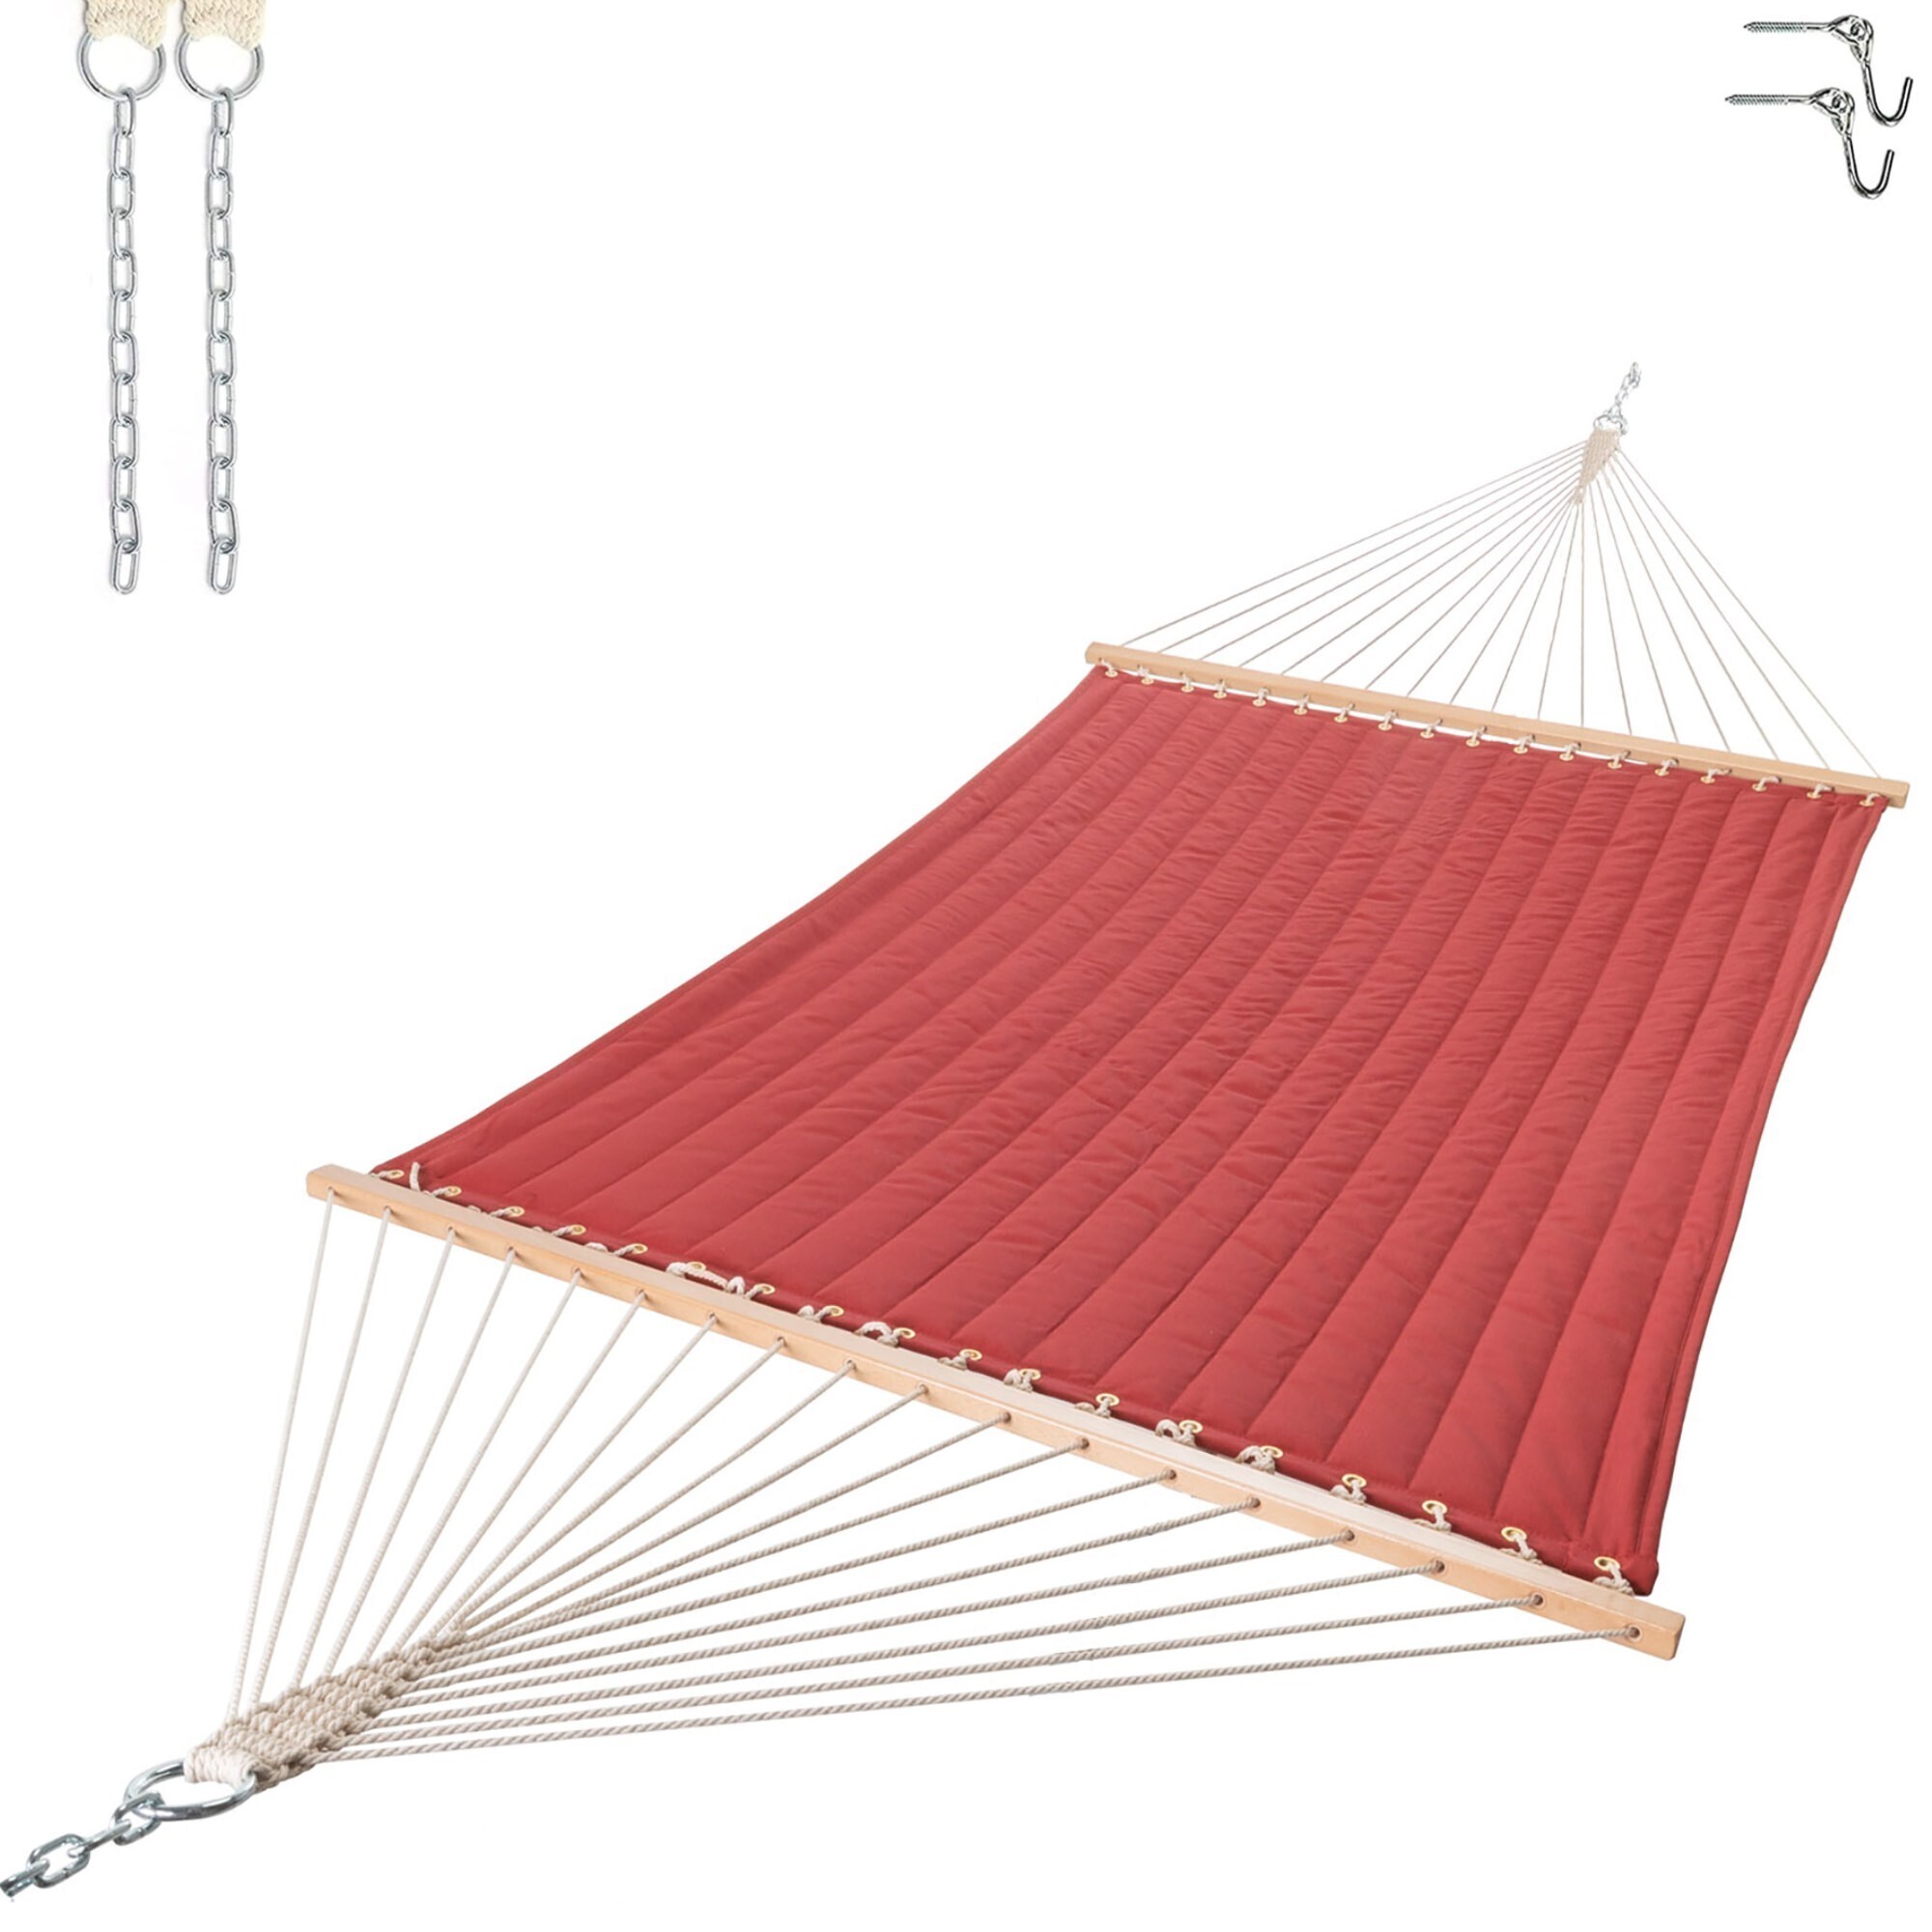 Castaway Living, Lg Quilted Hammock - Red, Color Red, Capacity 450 lb, Material Polyester, Model QHDRED